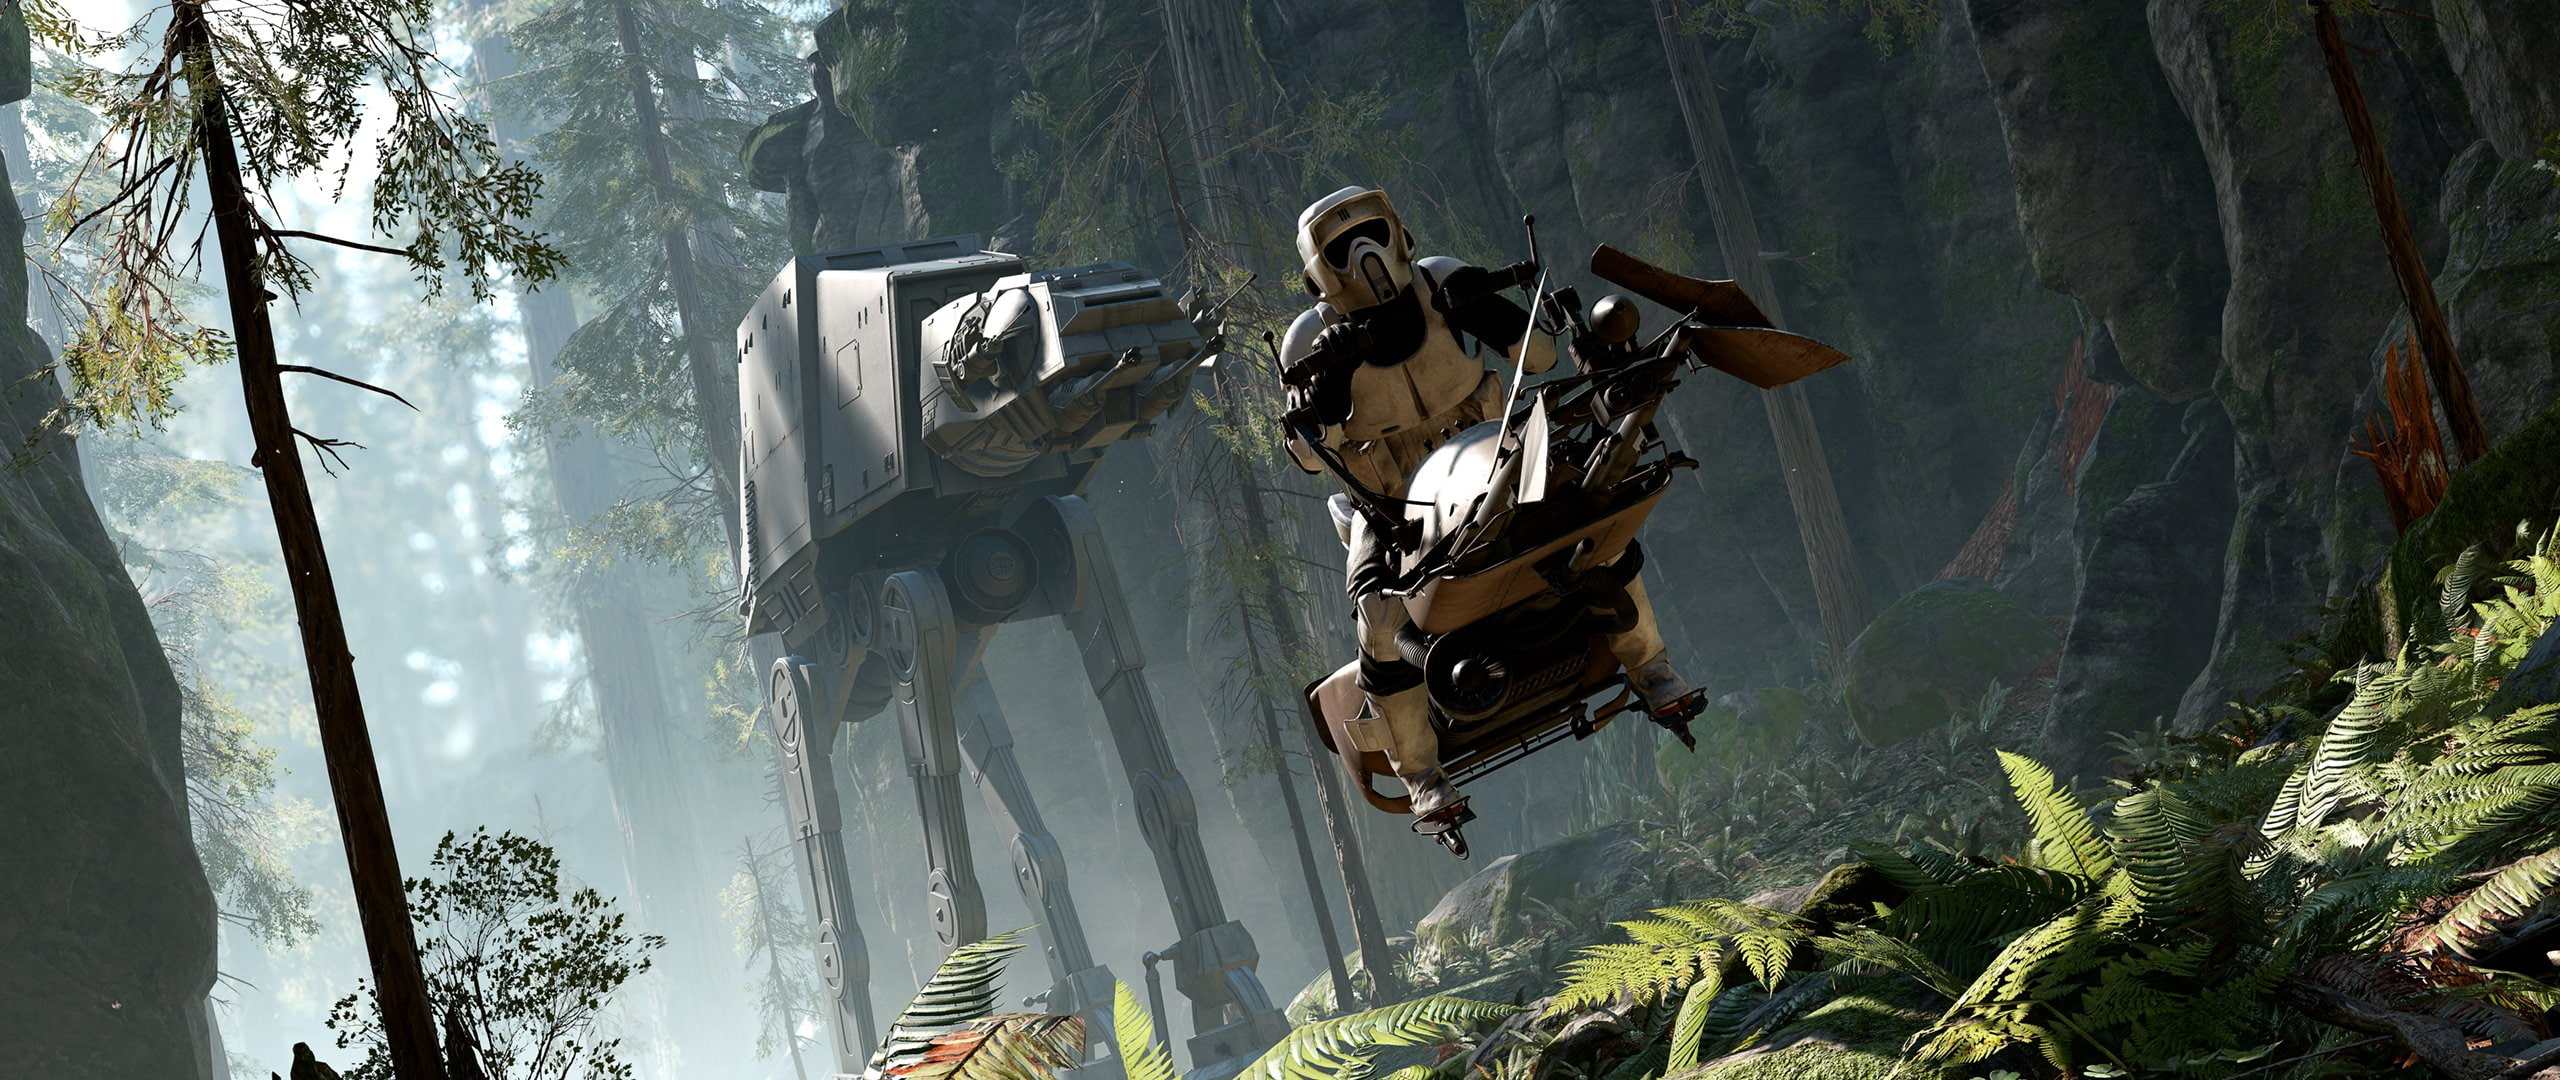 2560x1080 px, action, Battlefront, fi, Fighting, Futuristic